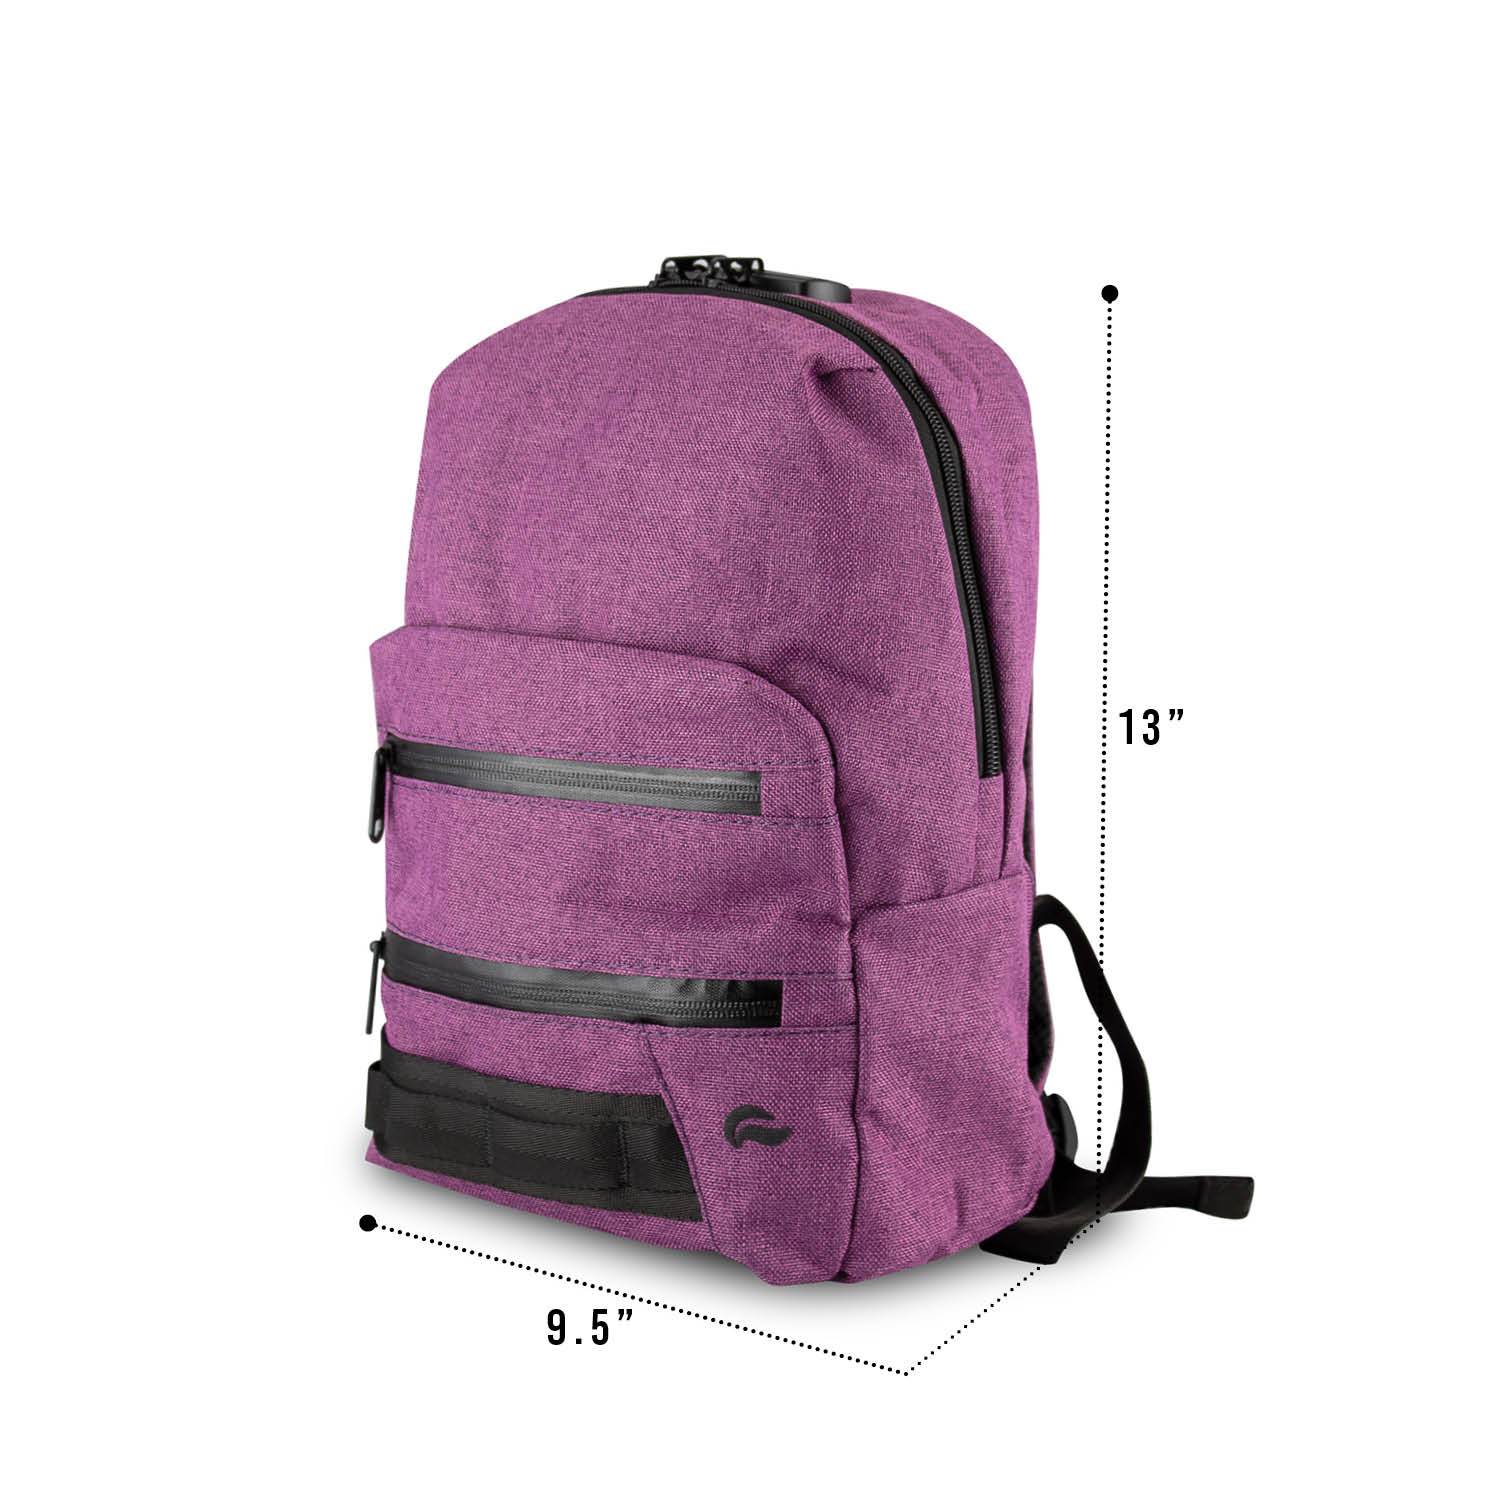 Synthetic Minissimi Backpack with flap and outside pockets. B2B Lugano